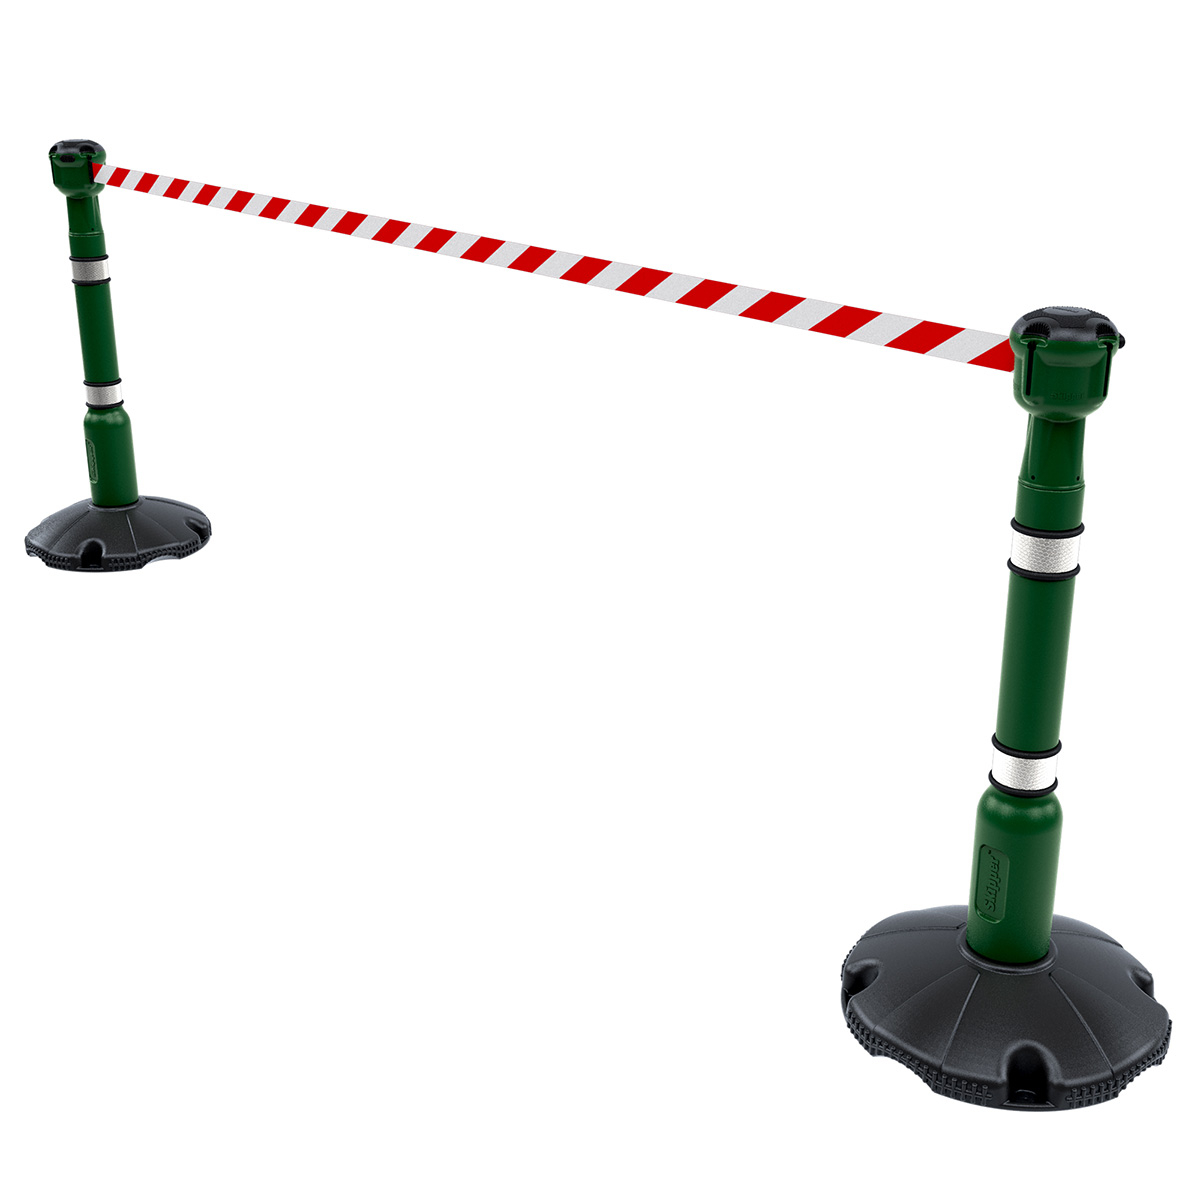 Skipper™ Retractable Barrier Kit 9m Forms an Instant Barrier